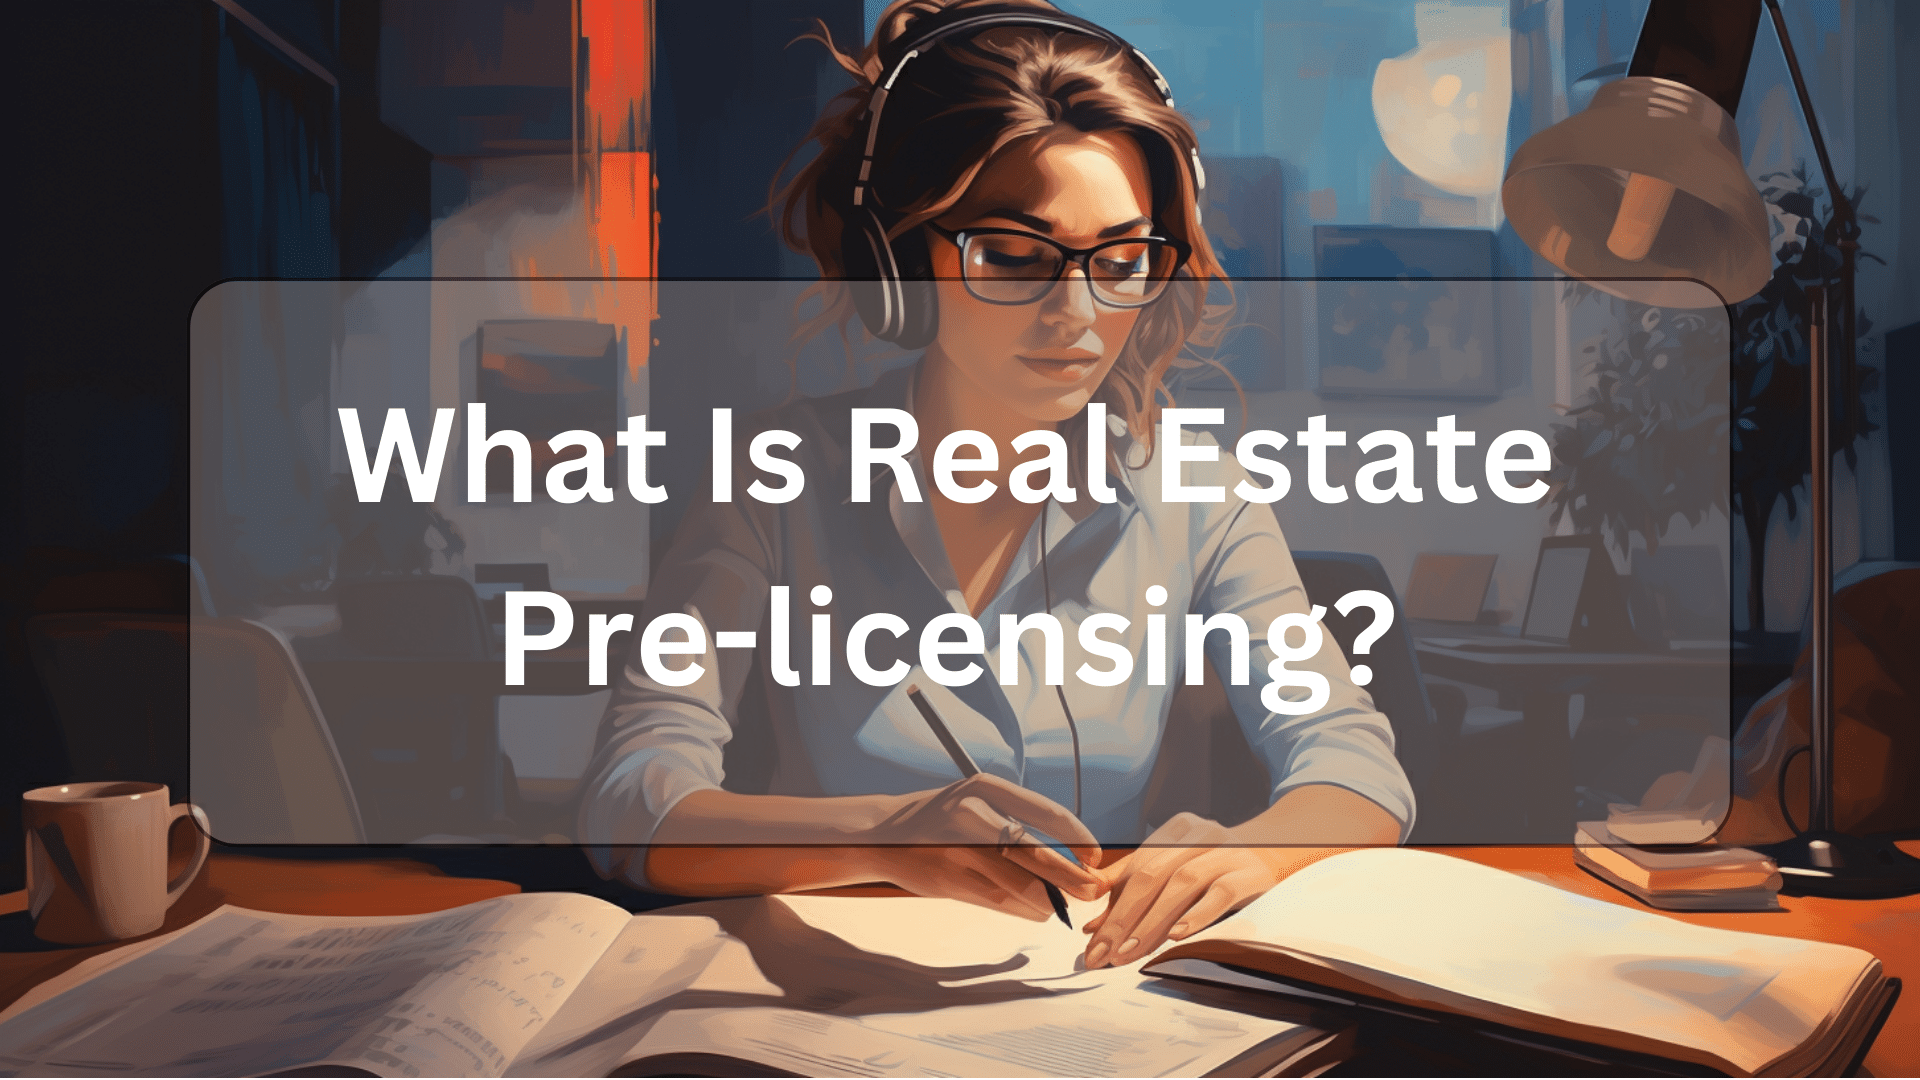 What Is Real Estate Pre-Licensing?